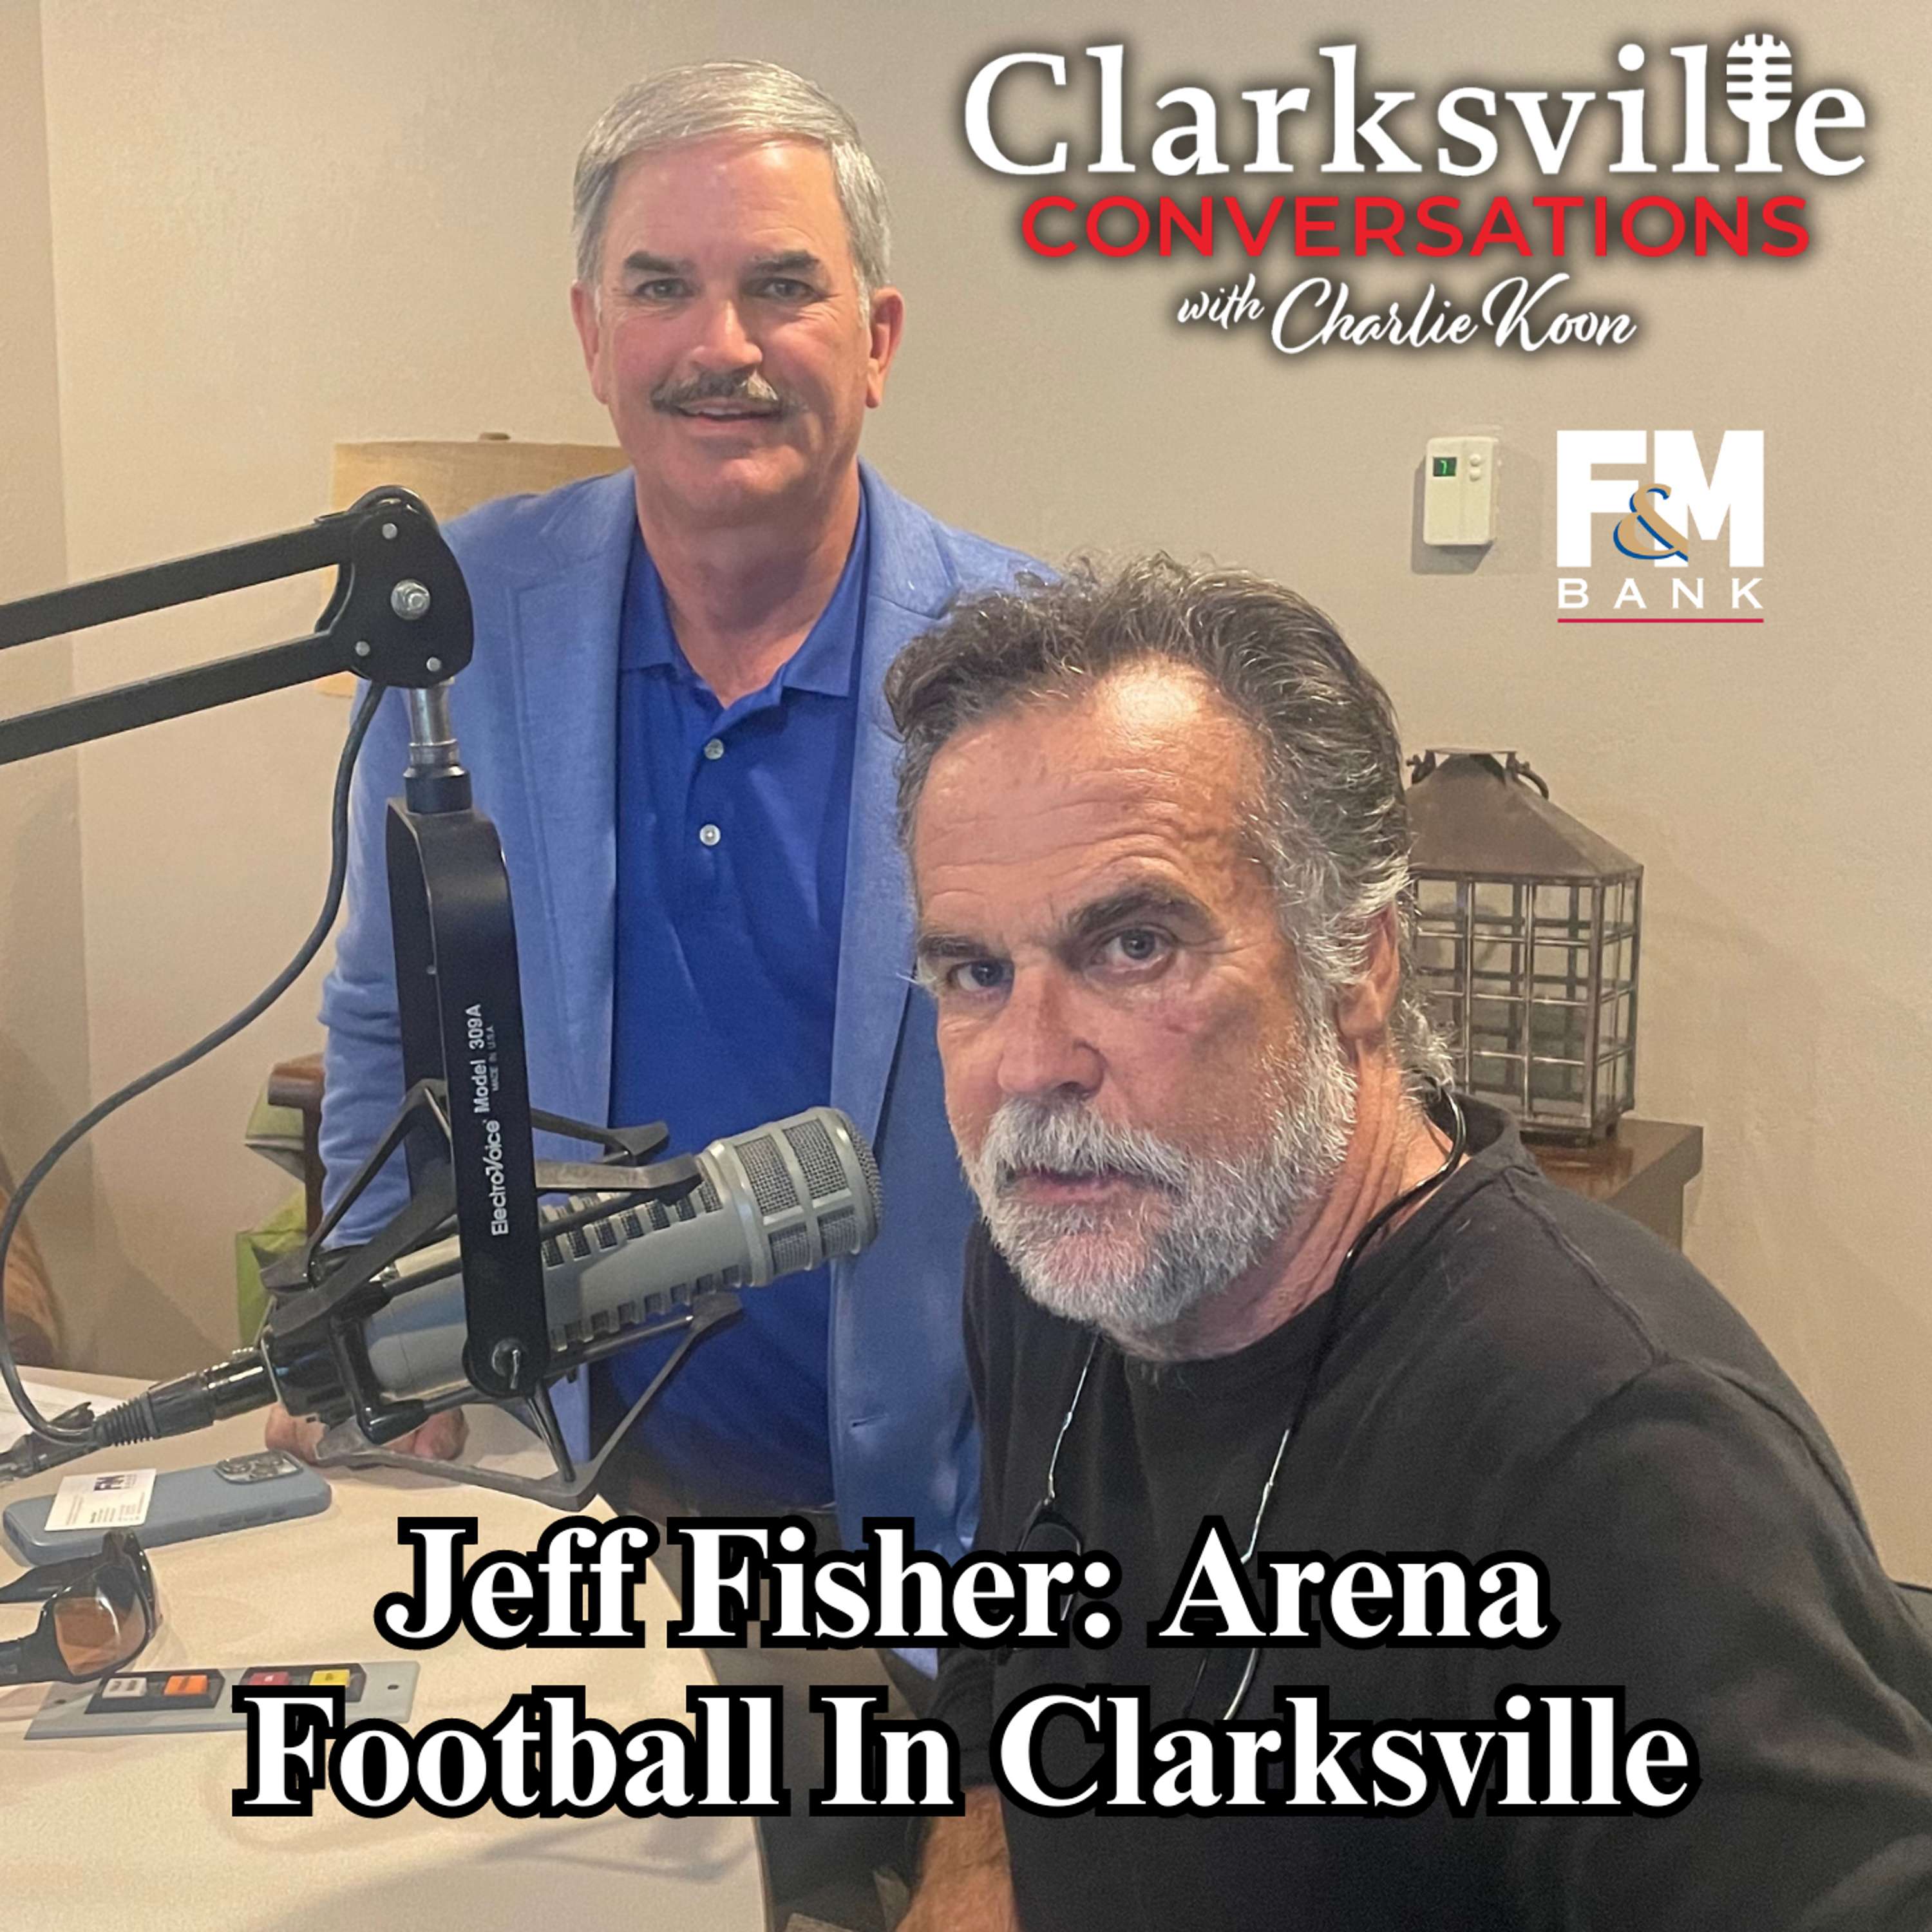 Jeff Fisher: Arena Football In Clarksville